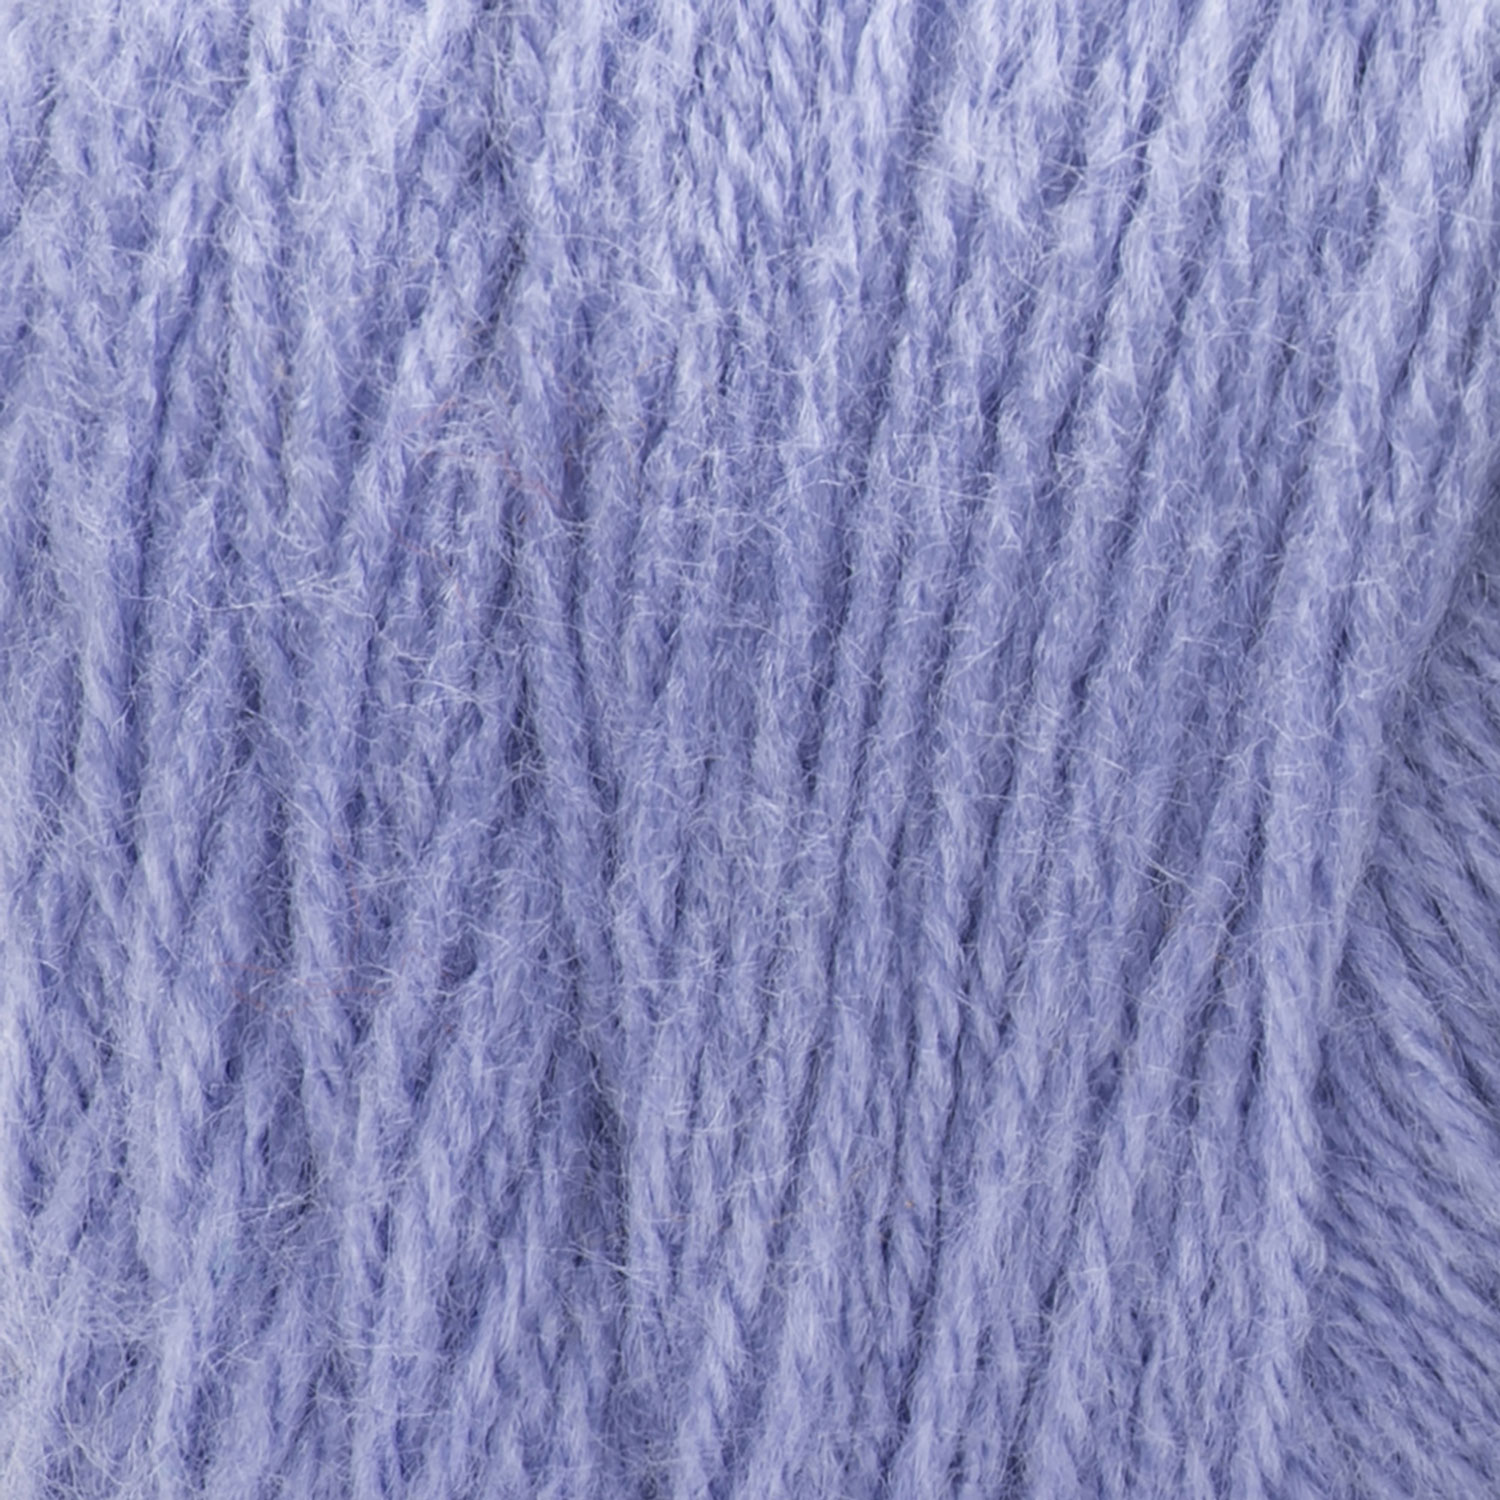 Wisteria Respun Thick and Quick Yarn -  Canada